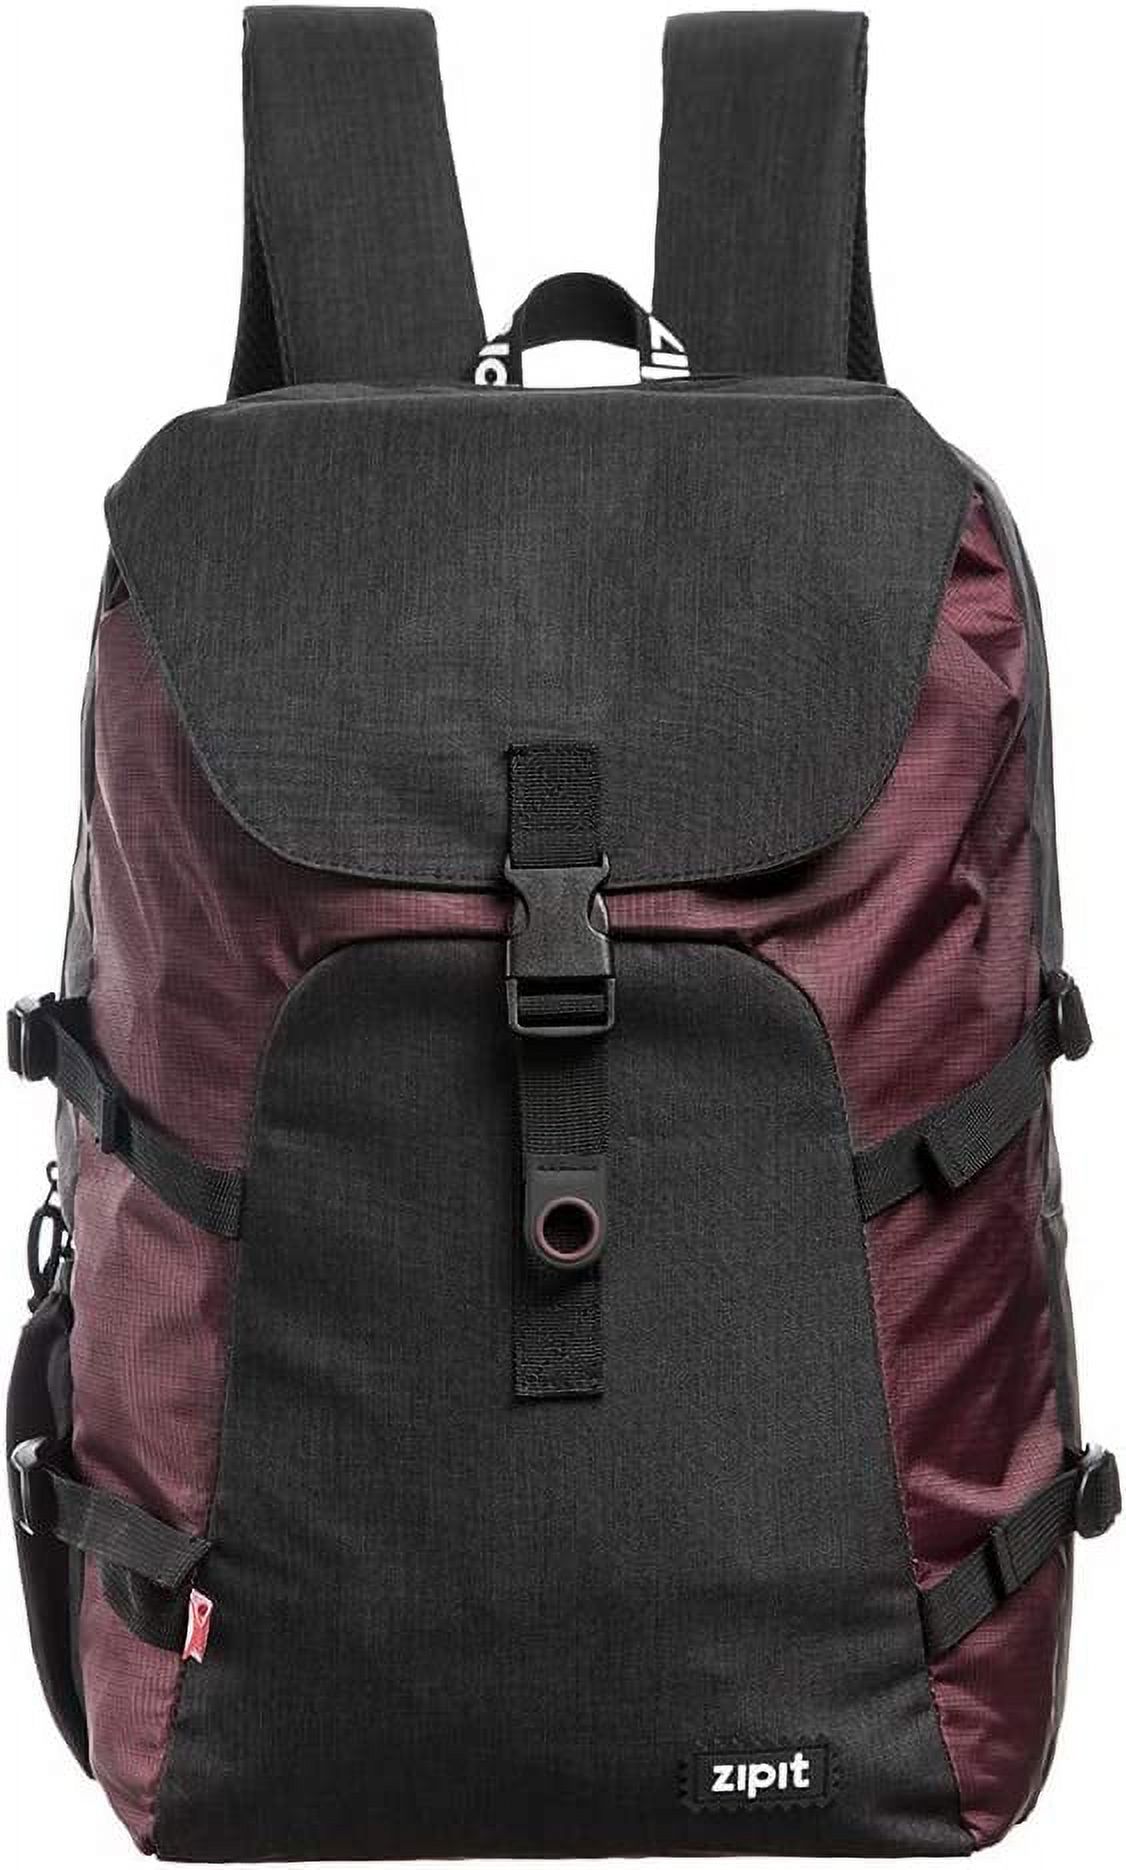 ZIPIT Metro Backpack, High School and College Bag, Padded Laptop Compartment, Sturdy and Lightweight (Black & Dark Red) - image 1 of 8